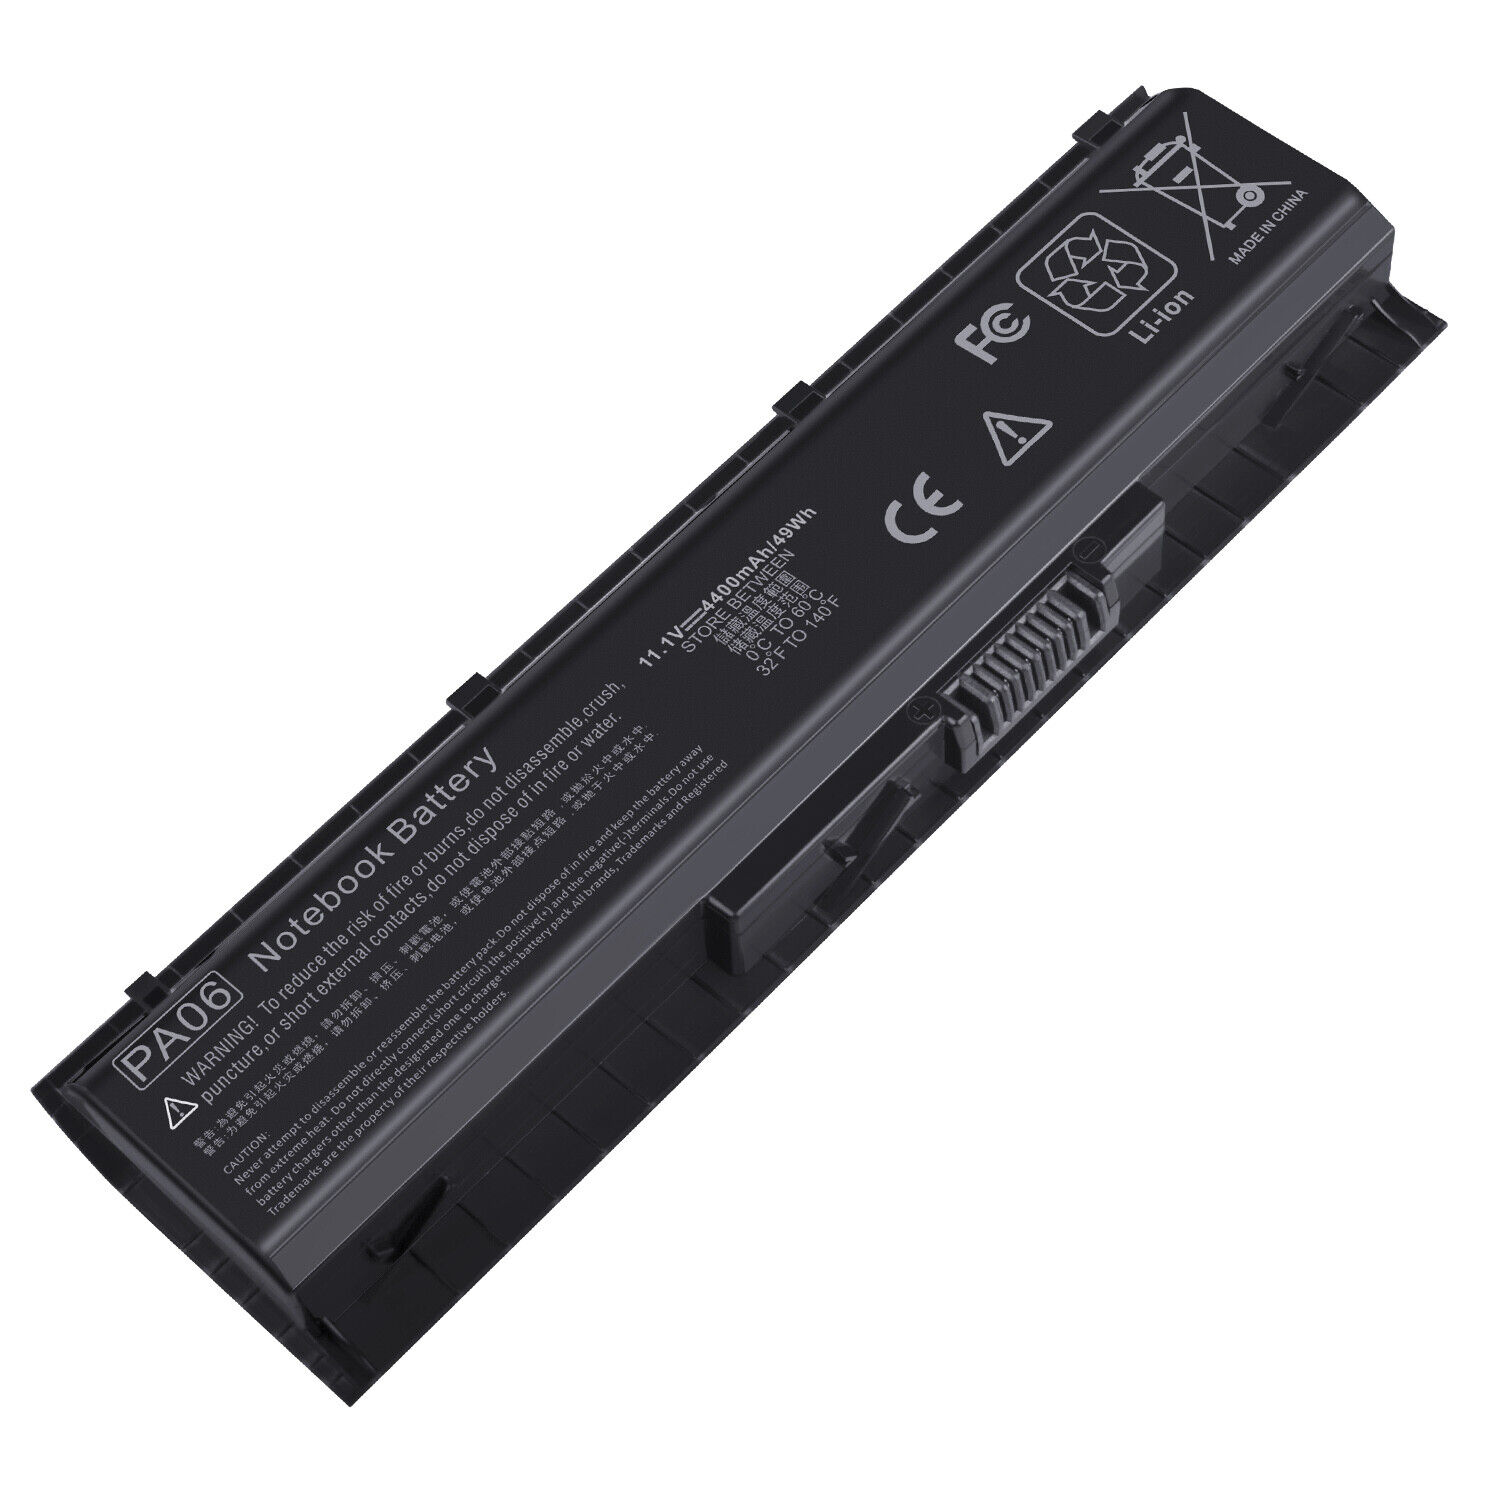 62WH PA06 849911-850 Battery for HP Omen 17 17-w000 17-w200 17-ab000 849571-221